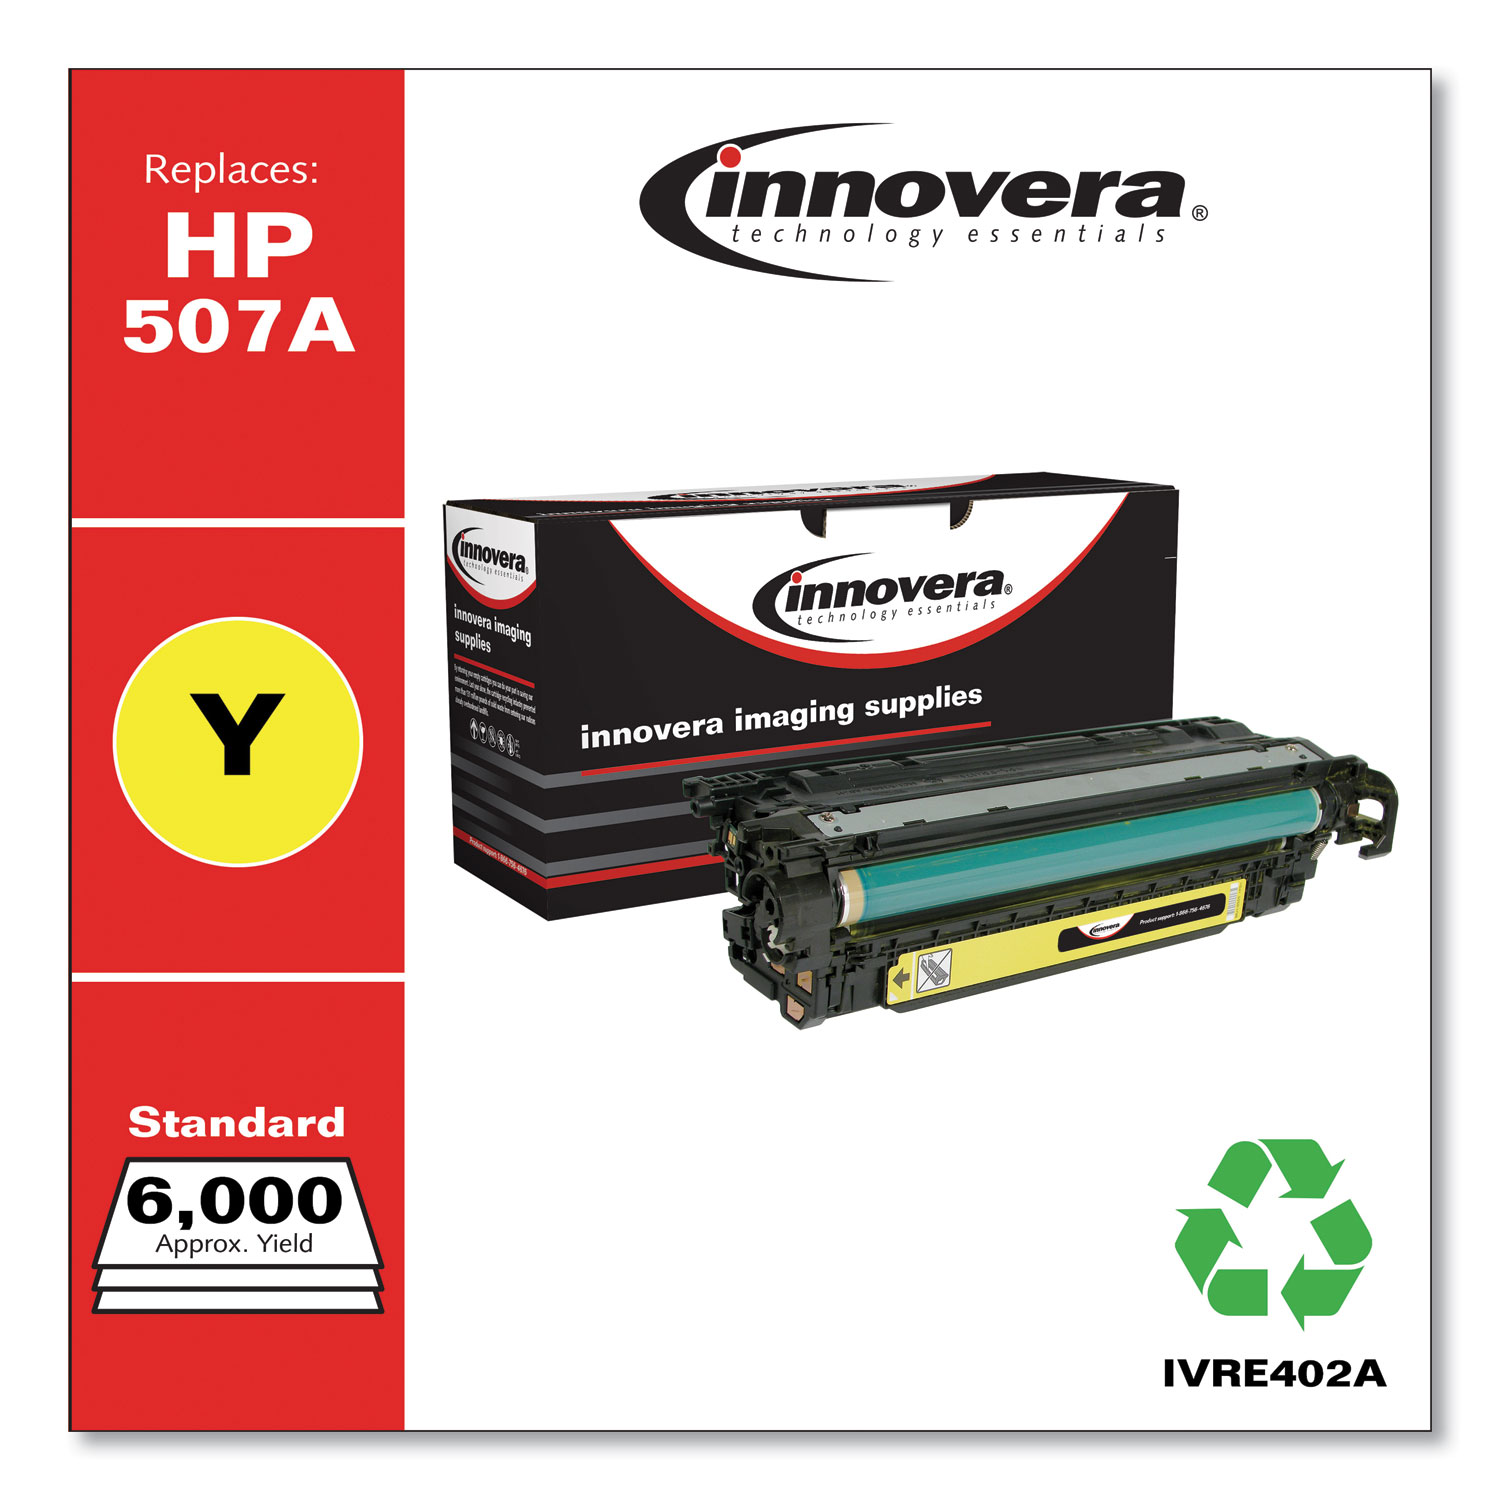  Innovera IVRE402A Remanufactured CE402A (507A) Toner, 6000 Page-Yield, Yellow (IVRE402A) 